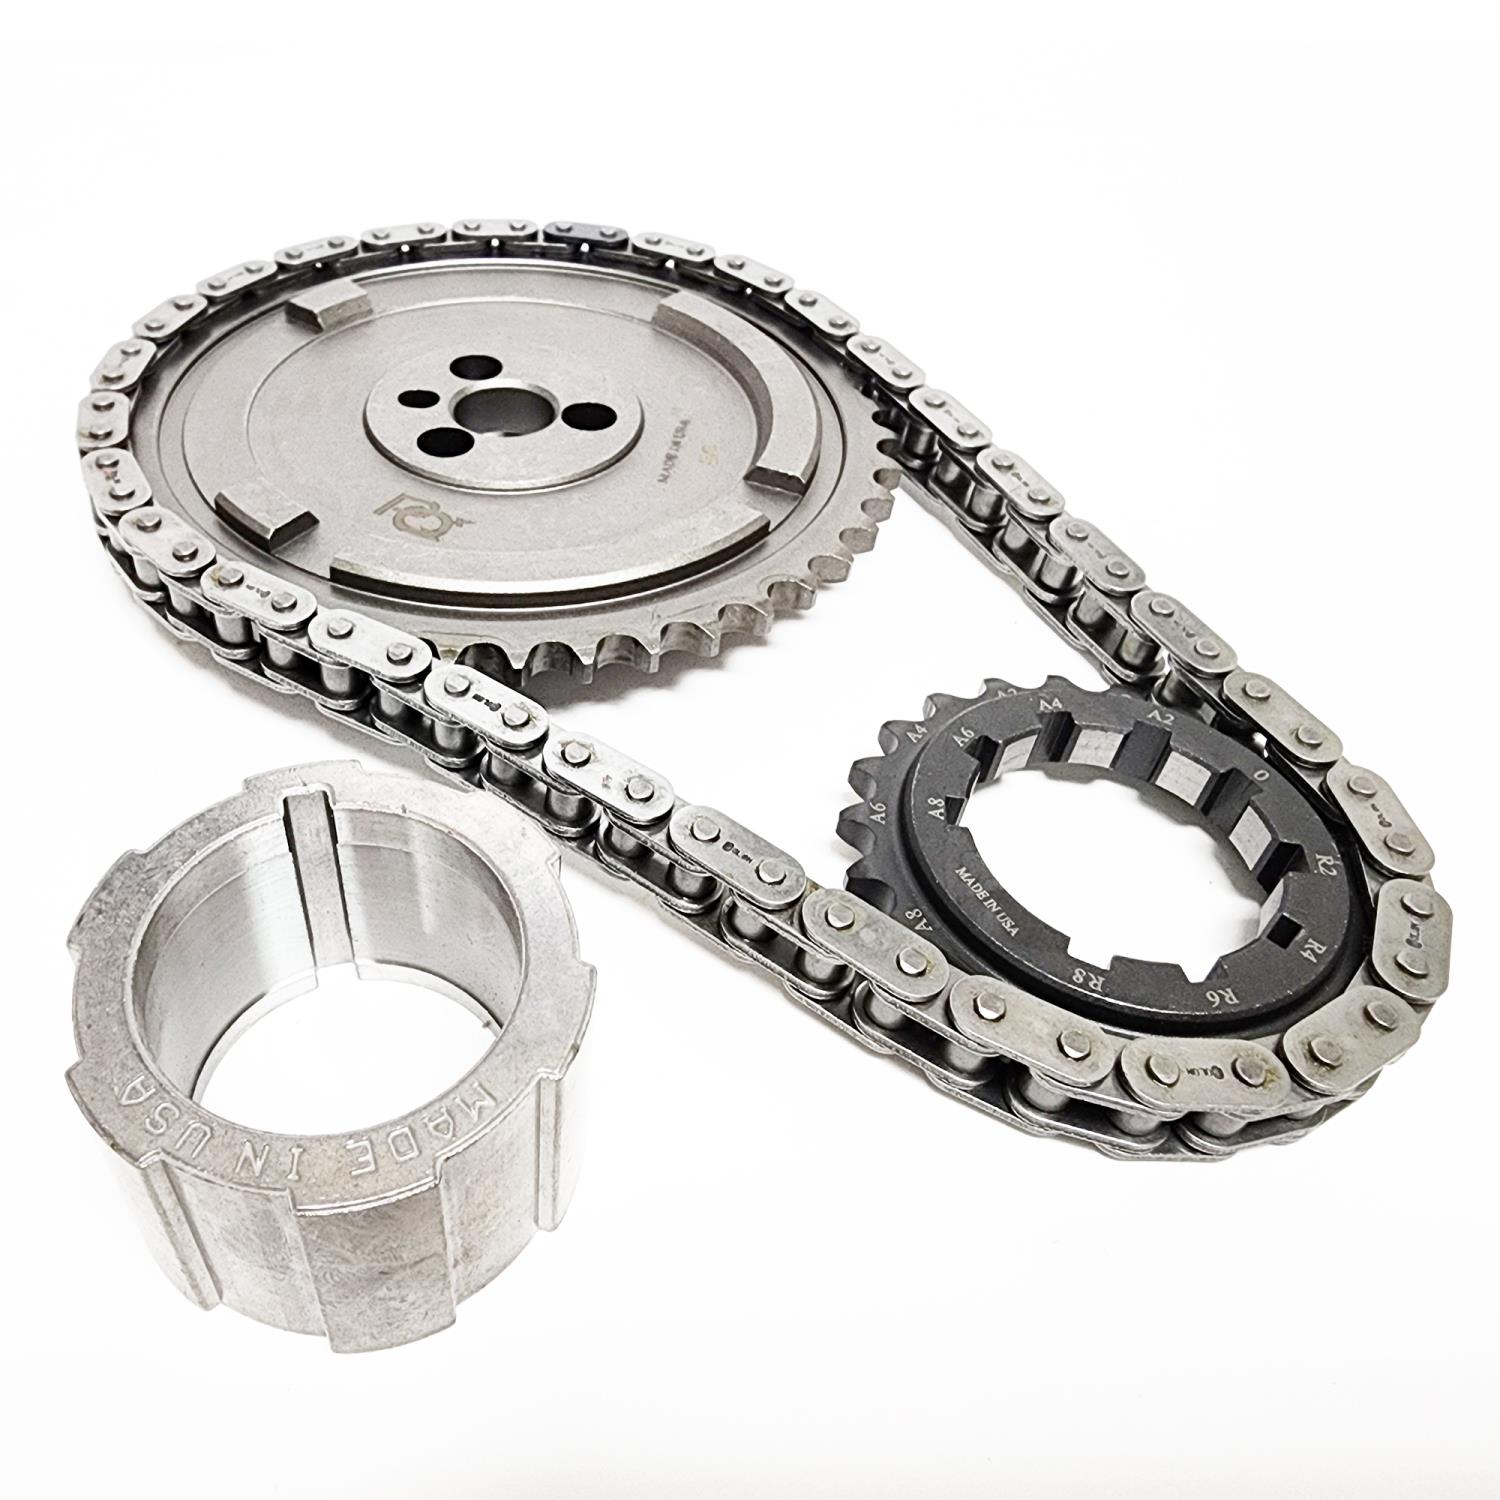 Single-Roller Timing Chain and Gear Set for 2006